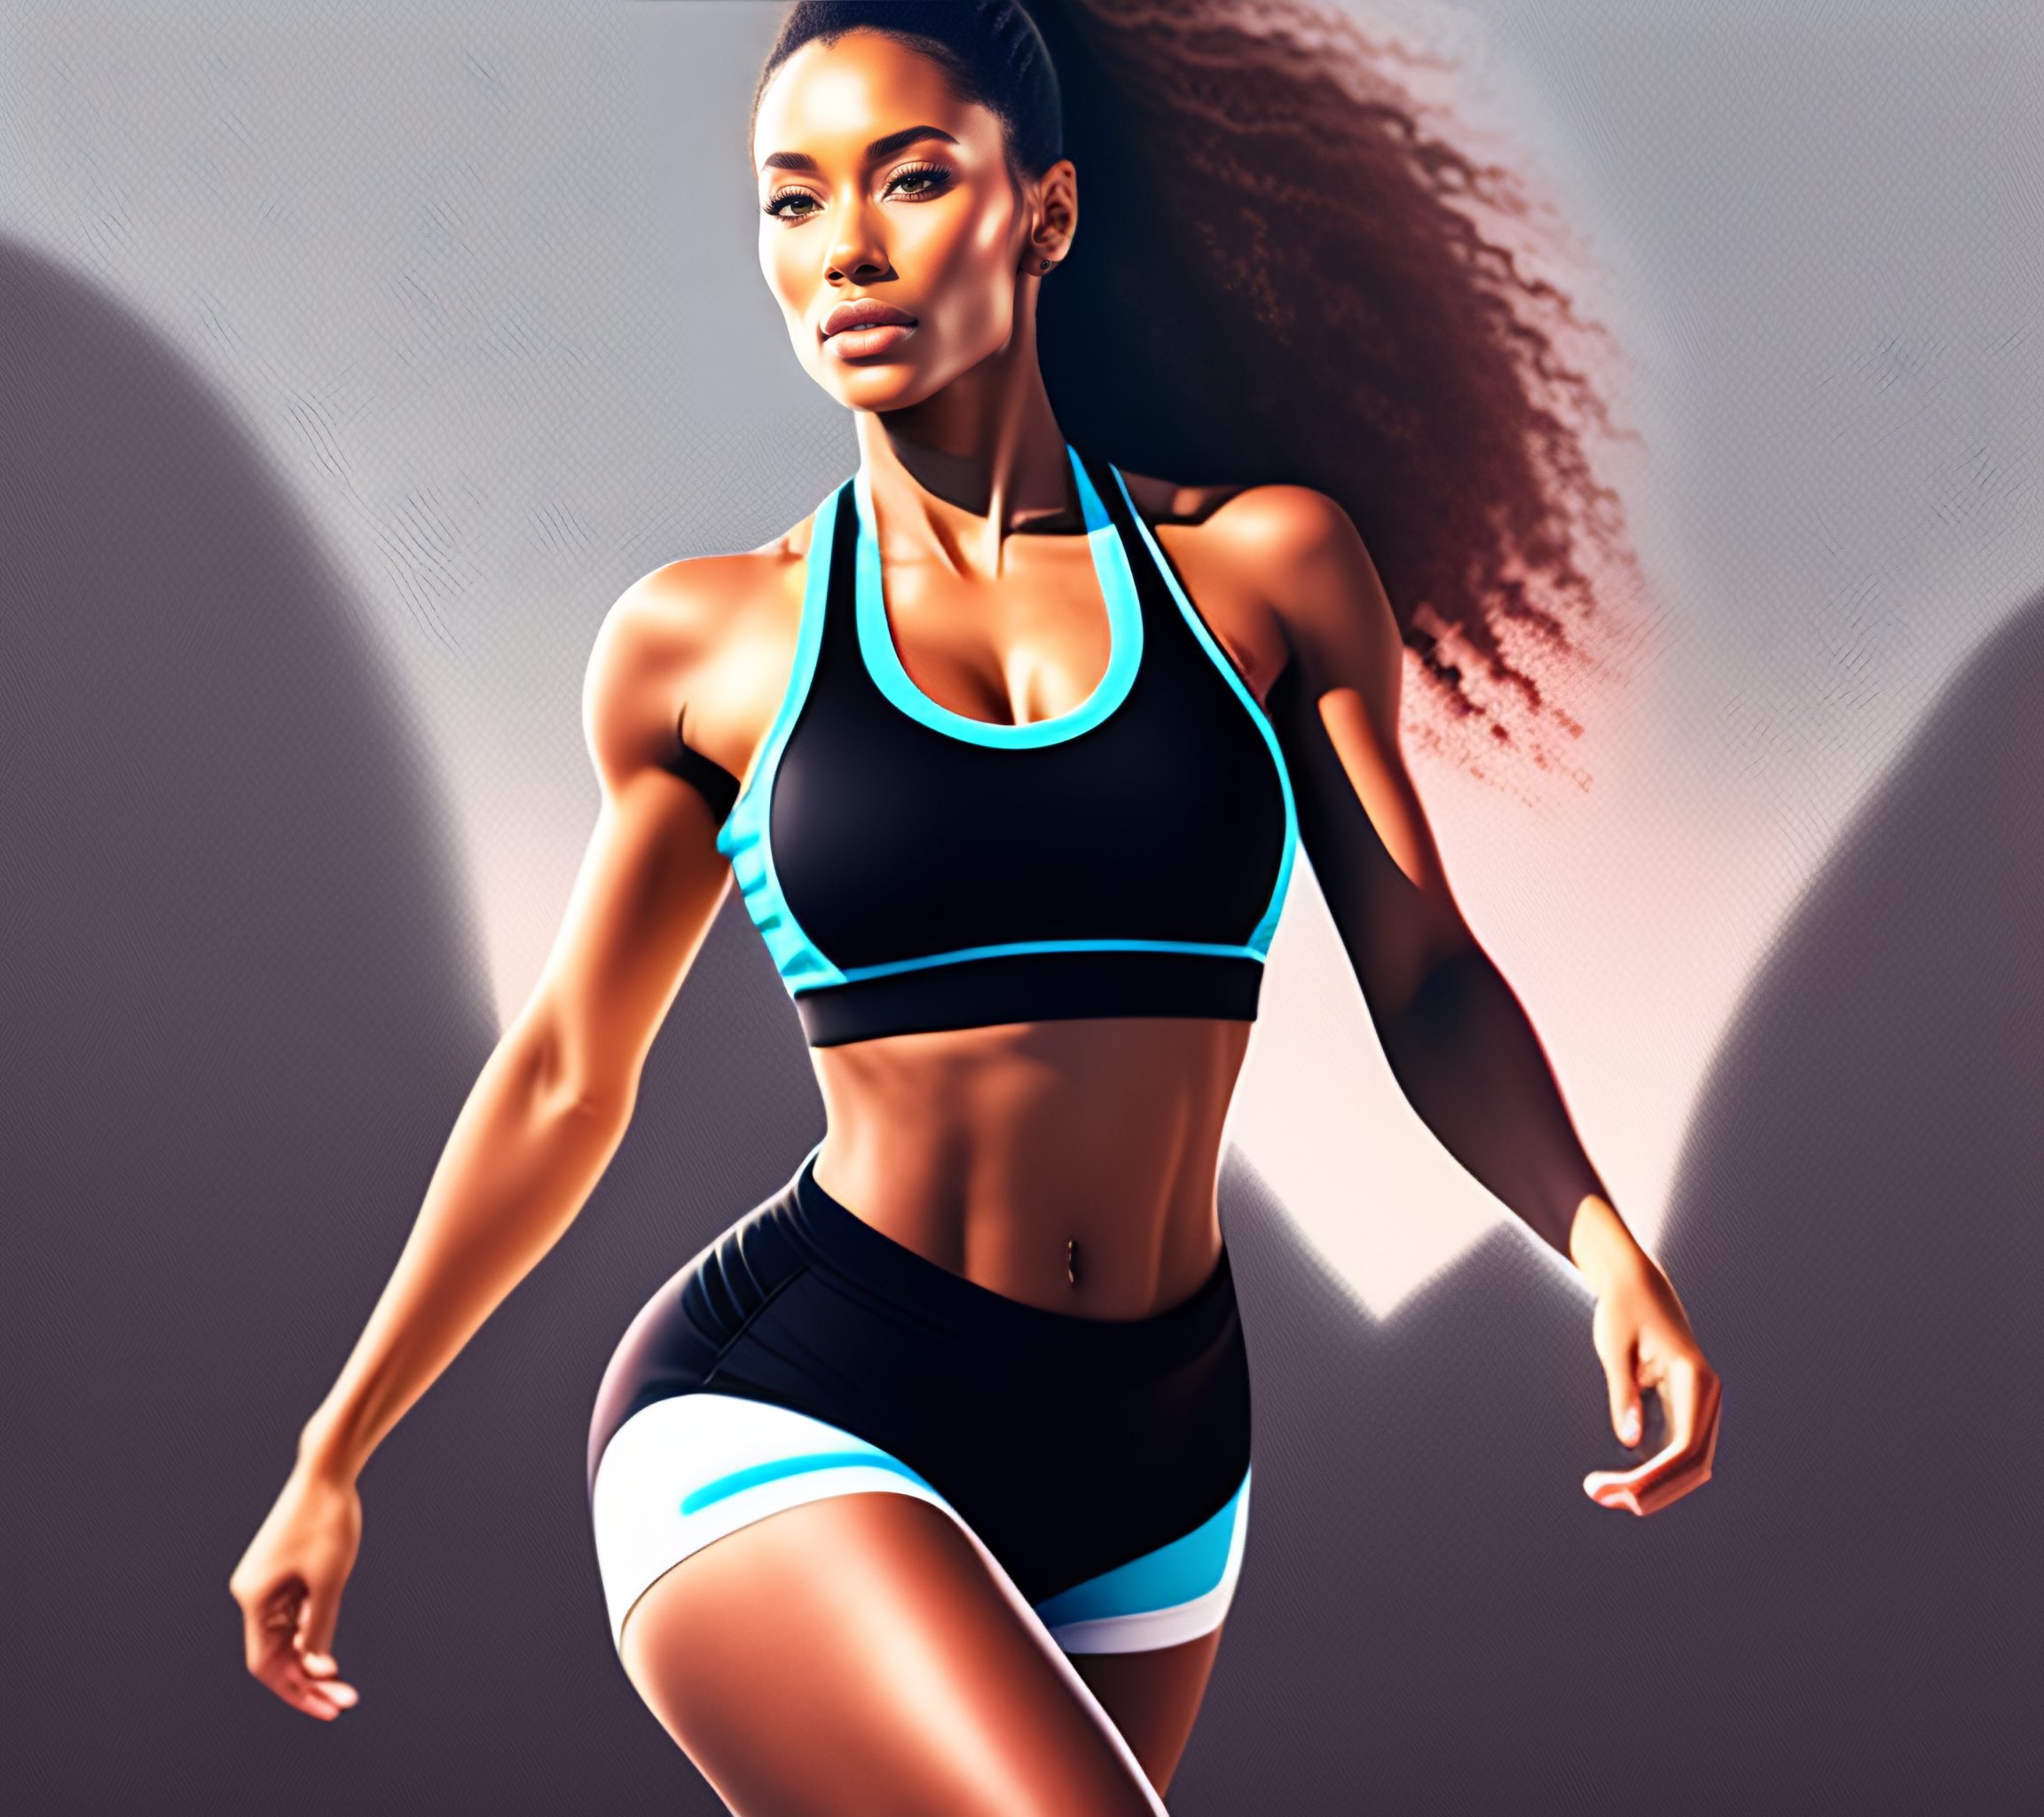 Lexica - A woman in a sports bra top and shorts, featured on dribble,  superflat, dynamic pose, behance hd, flat shading, blond, app icon, black  and w